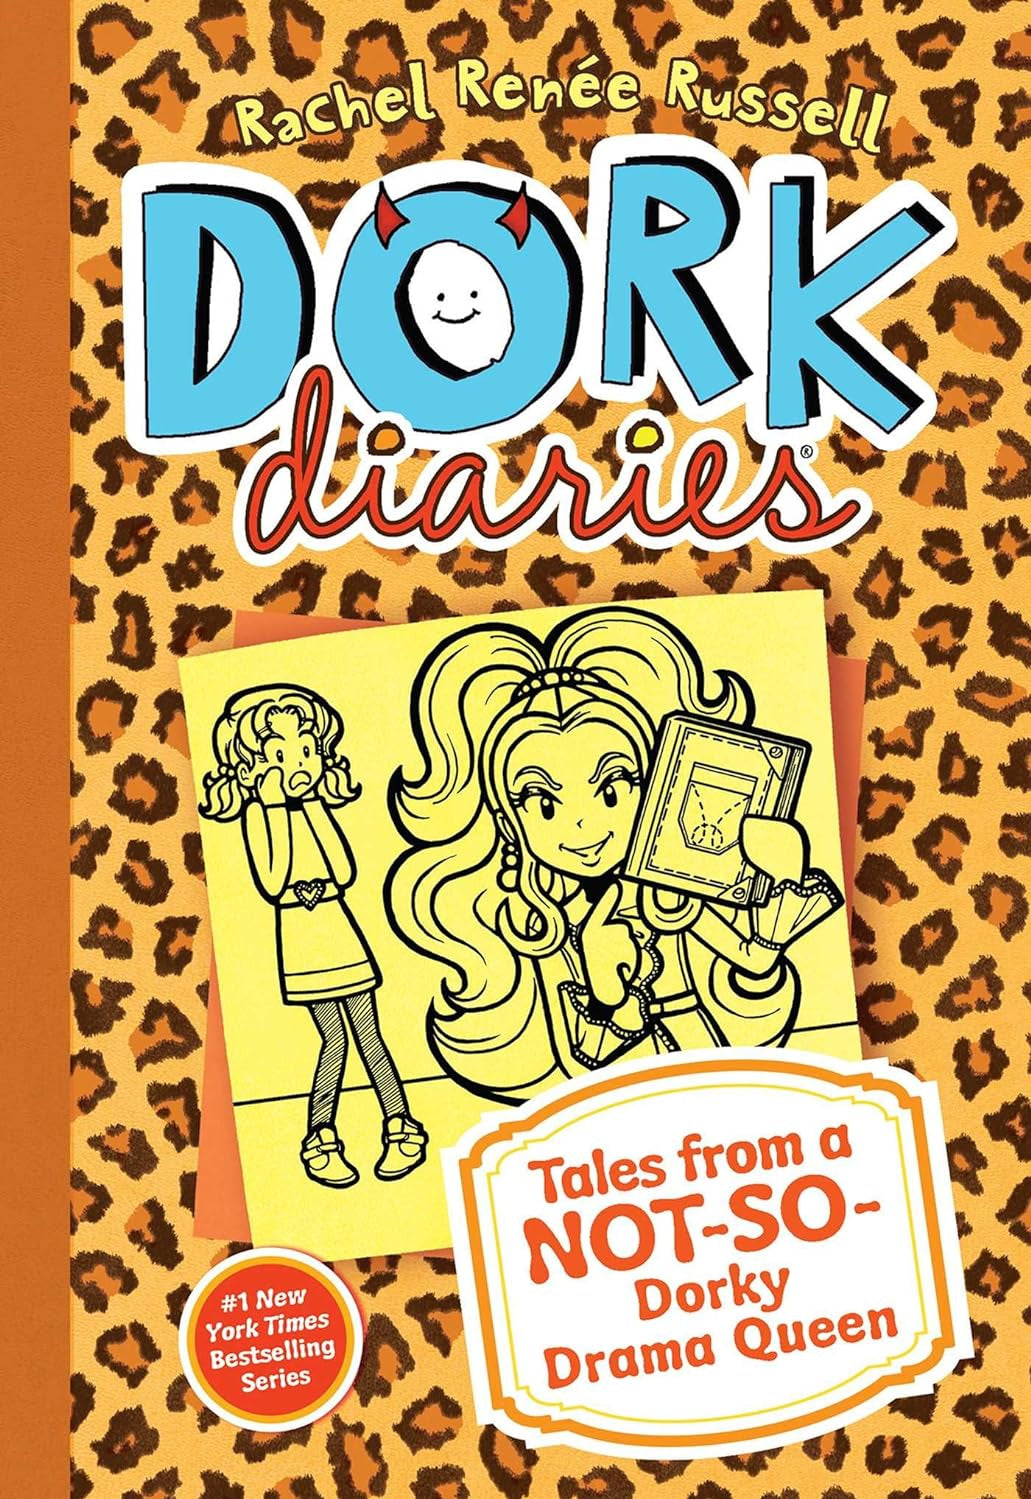 Dork Diaries 9: Tales from a Not-So-Dorky Drama Queen - by Rachel Renee Russell (Hardcover)